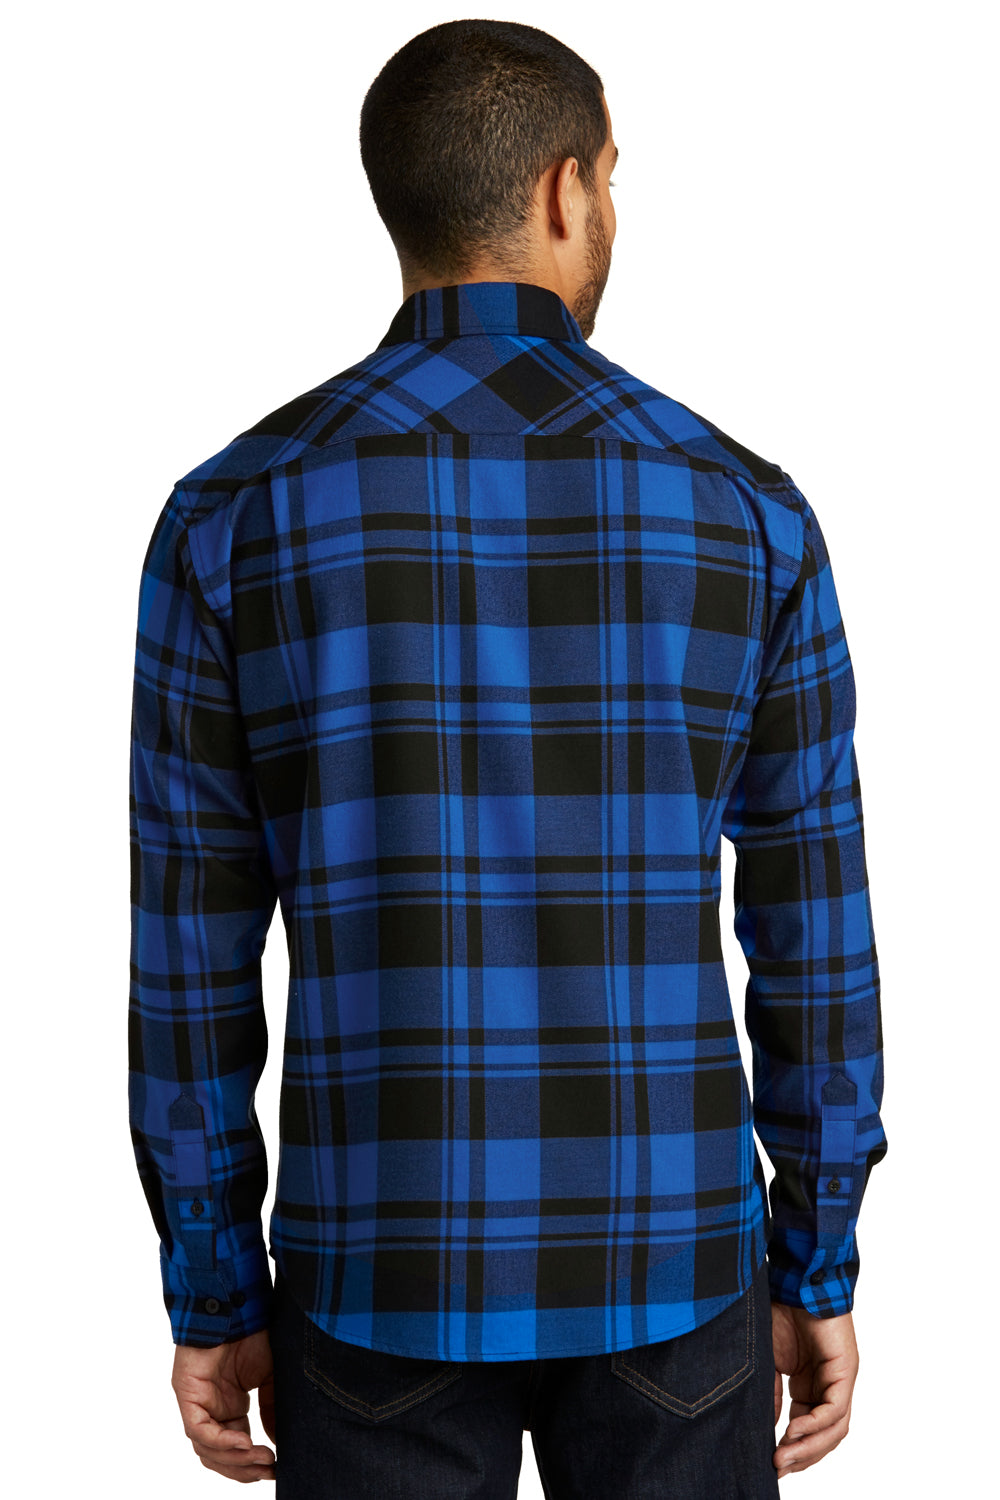 Port Authority W668 Mens Flannel Long Sleeve Button Down Shirt w/ Double Pockets Royal Blue/Black Back